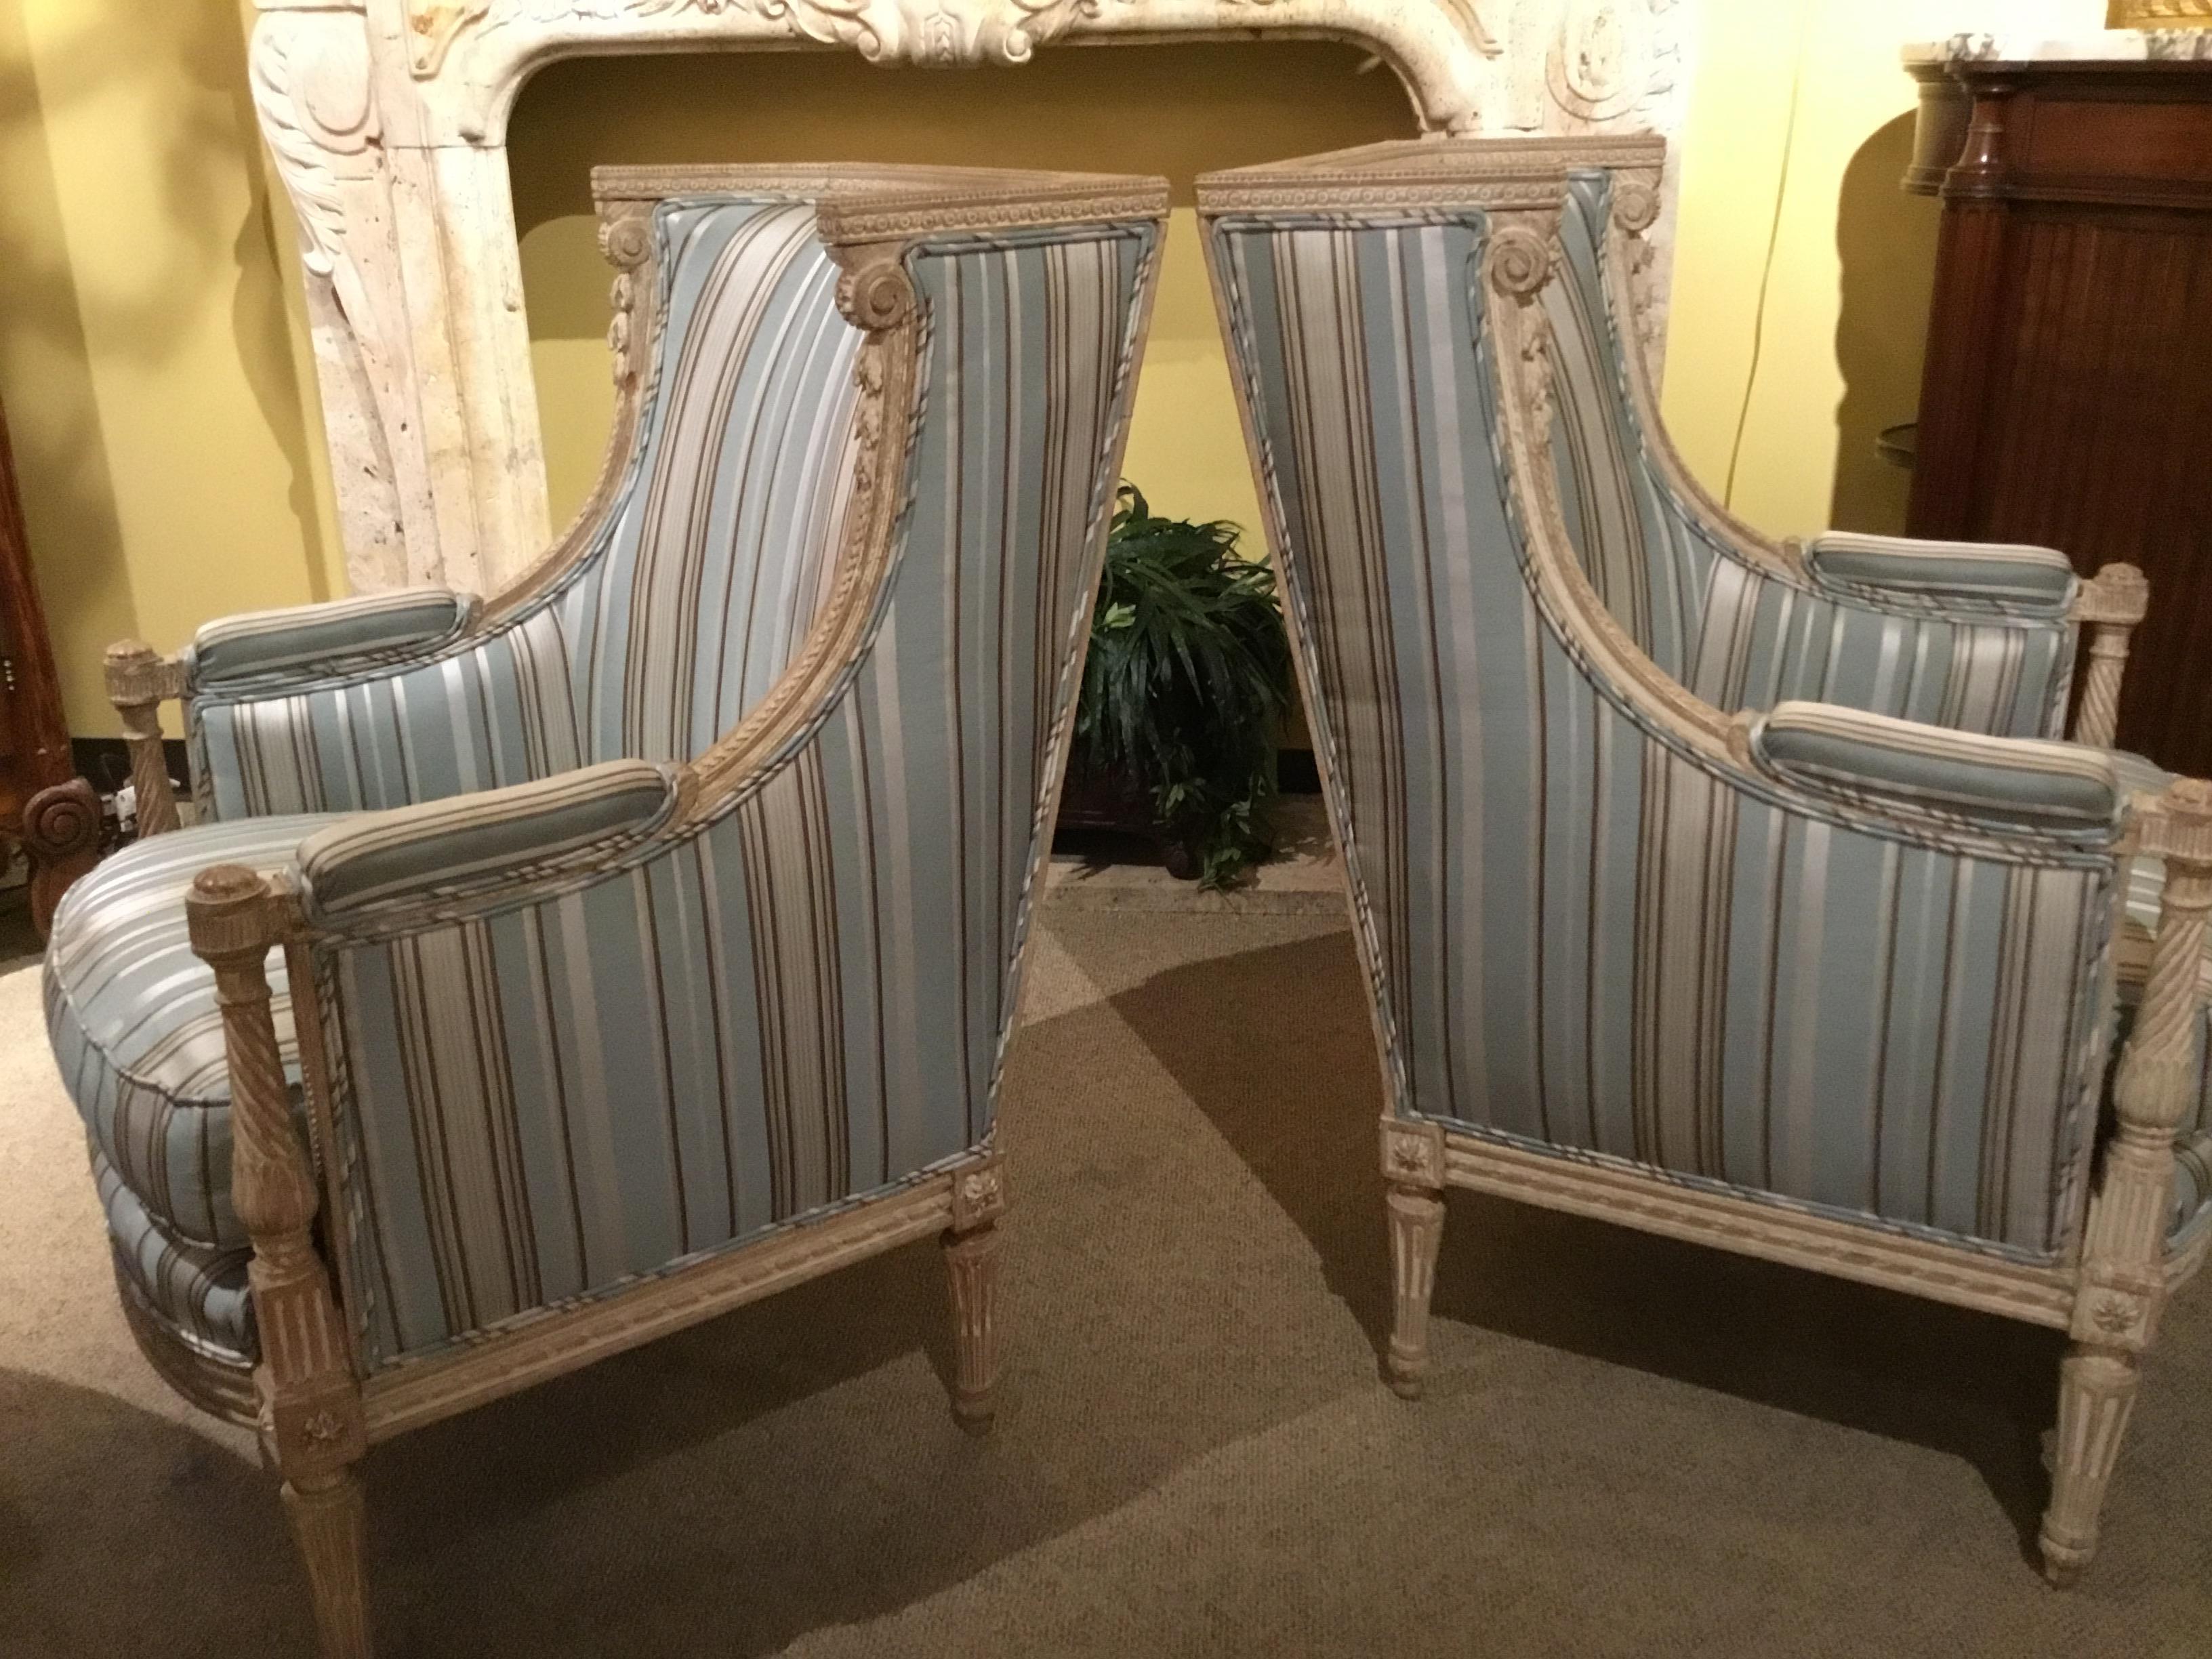 Late 19th century, each with a foliate-carved and annulated box-form crest above a padded back and
Downswept sides, joined by spiral-fluted uprights to the cushioned seats, raised on stop-fluted 

Tapering circular legs ending in toupie feet.